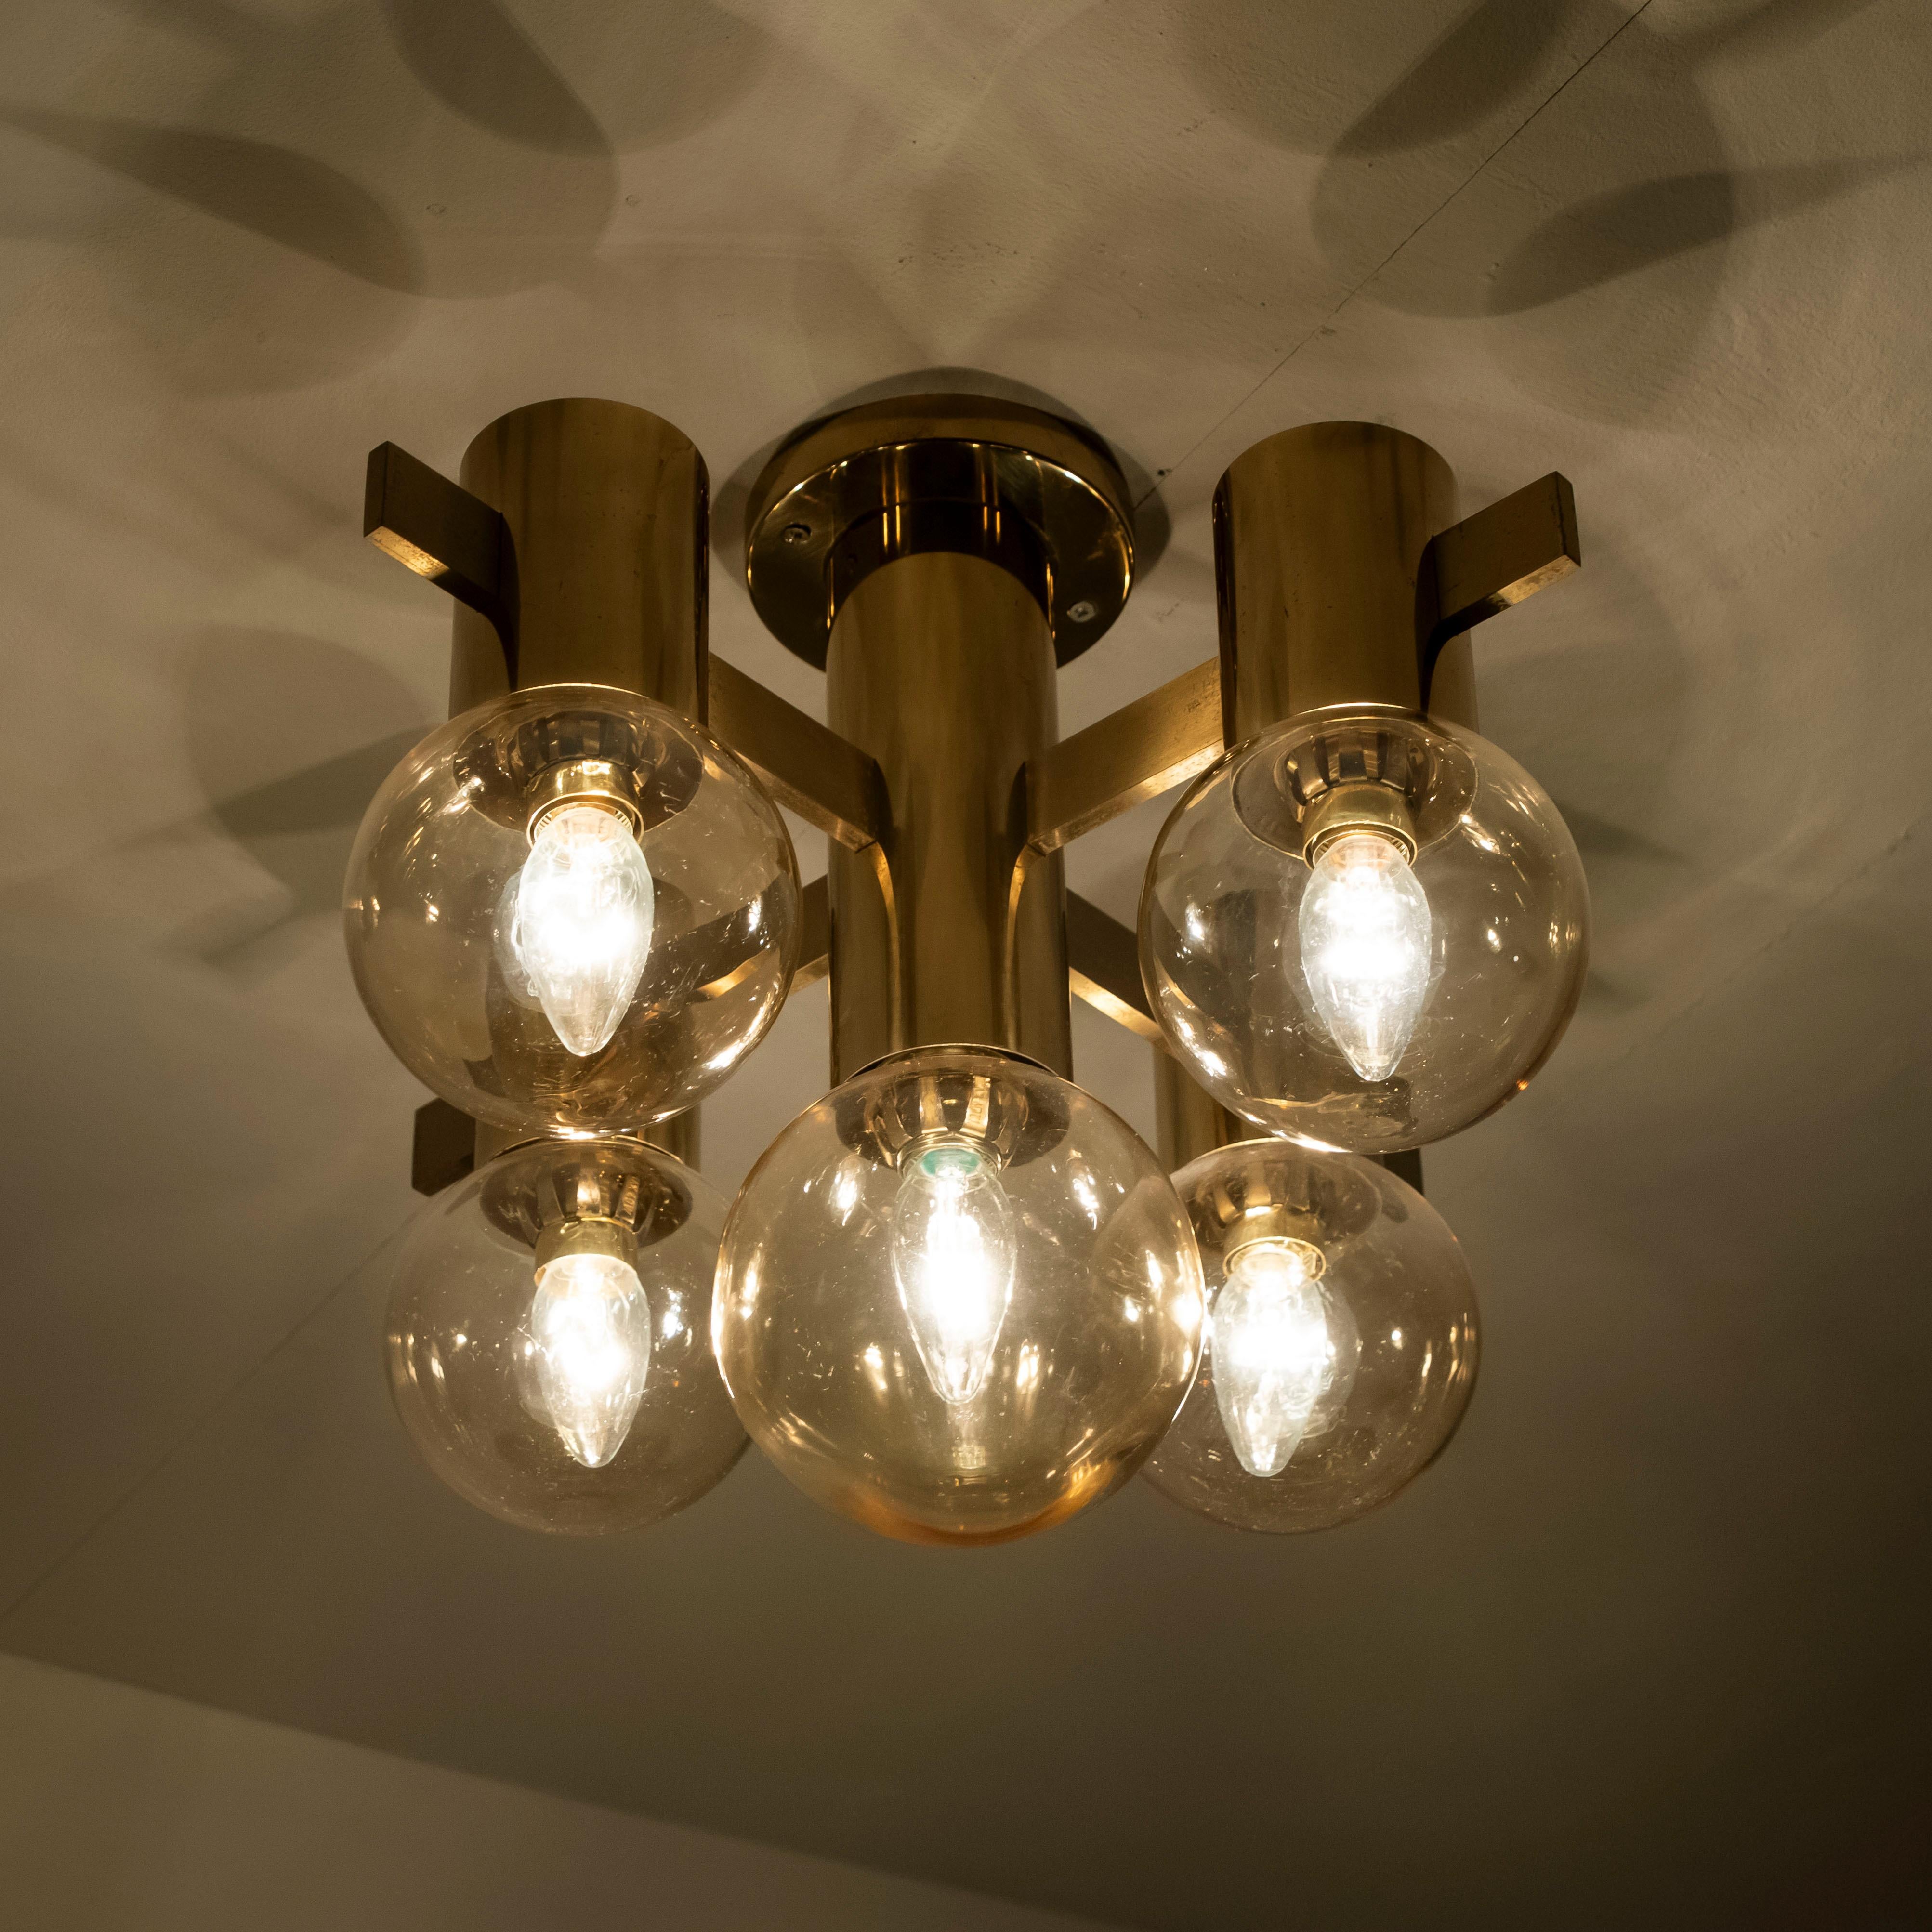 1 of the 3  brass light fixtures with smoked glass bowls and gold-plated fittings was produced in the 1970s in the style of Hans-Agne Jakobsson. Illuminates beautifully.

Size of the flush mount: 
Depth 13.8